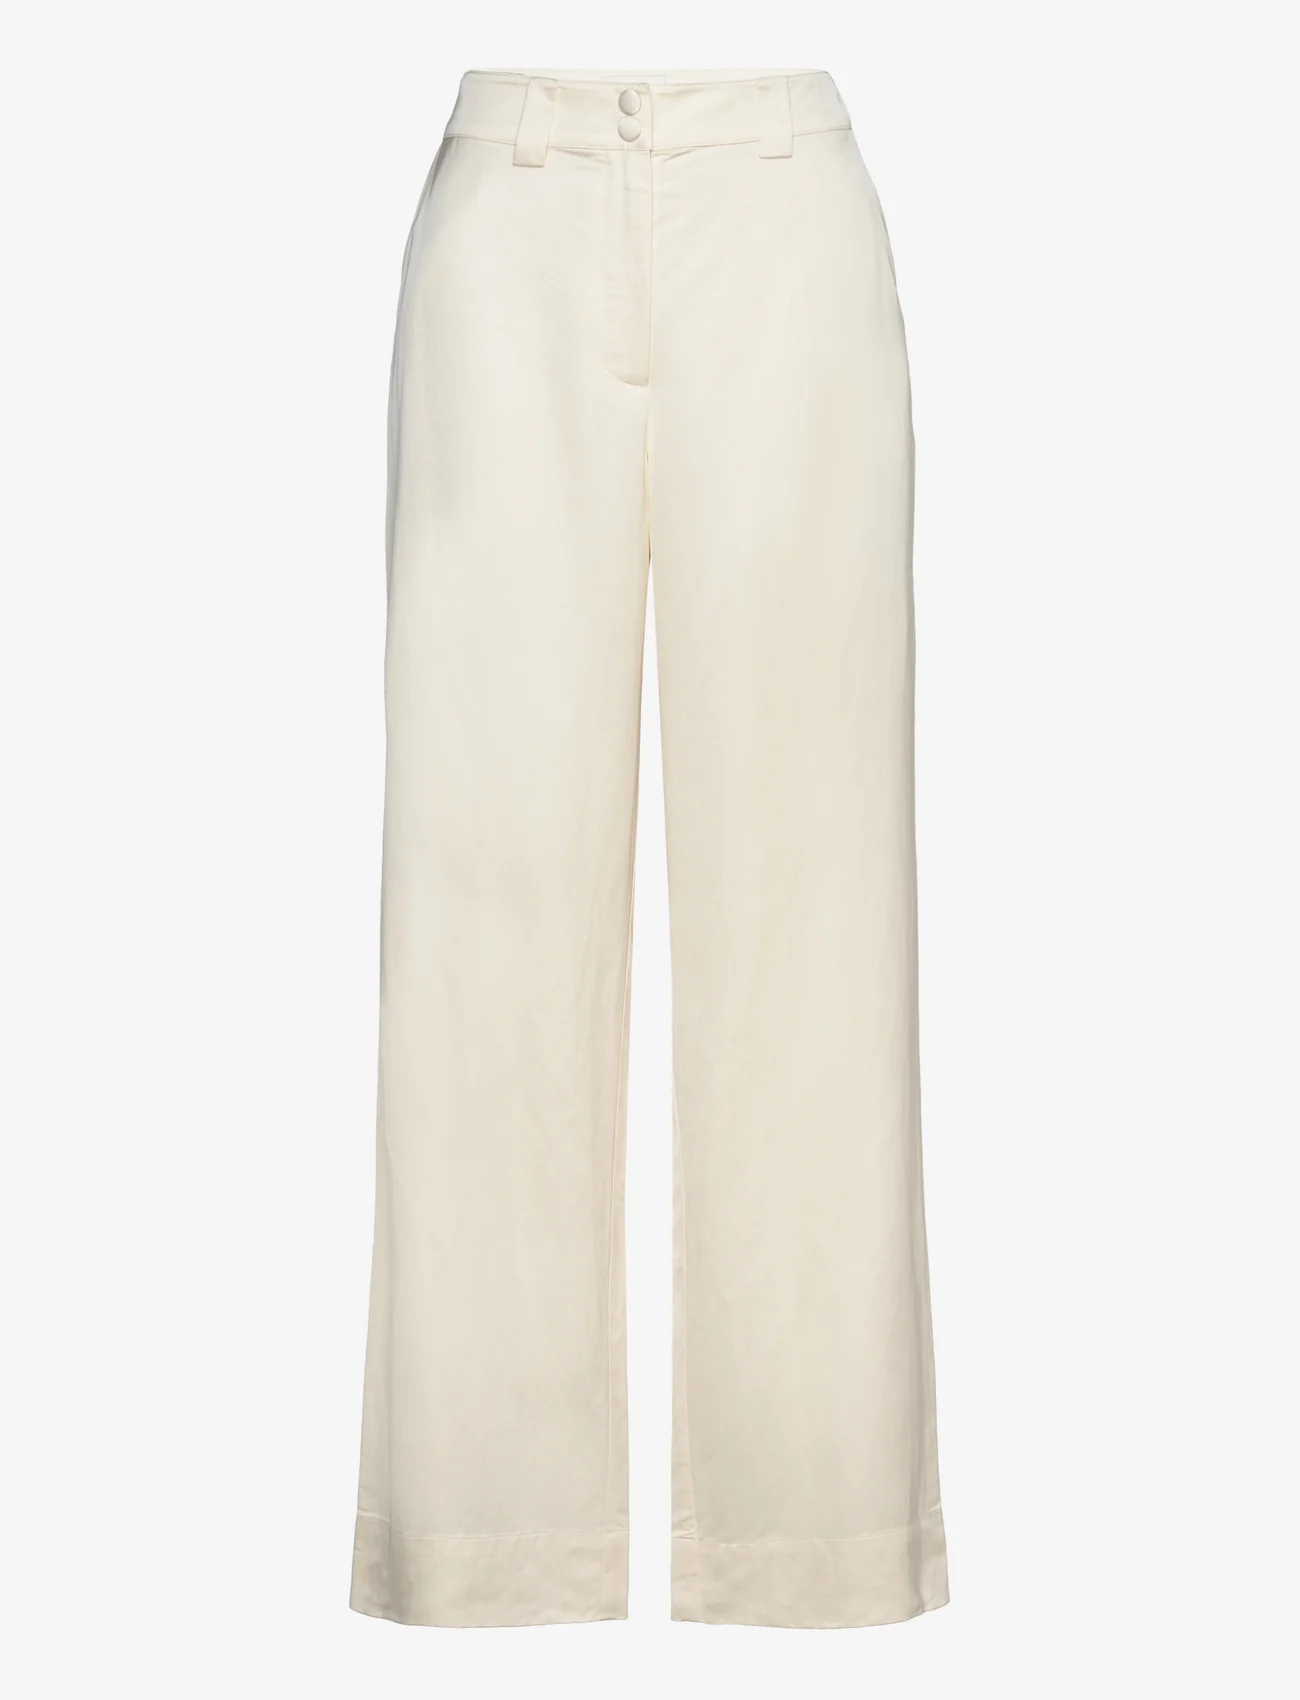 MAUD - Dina Trouser - party wear at outlet prices - off white - 0